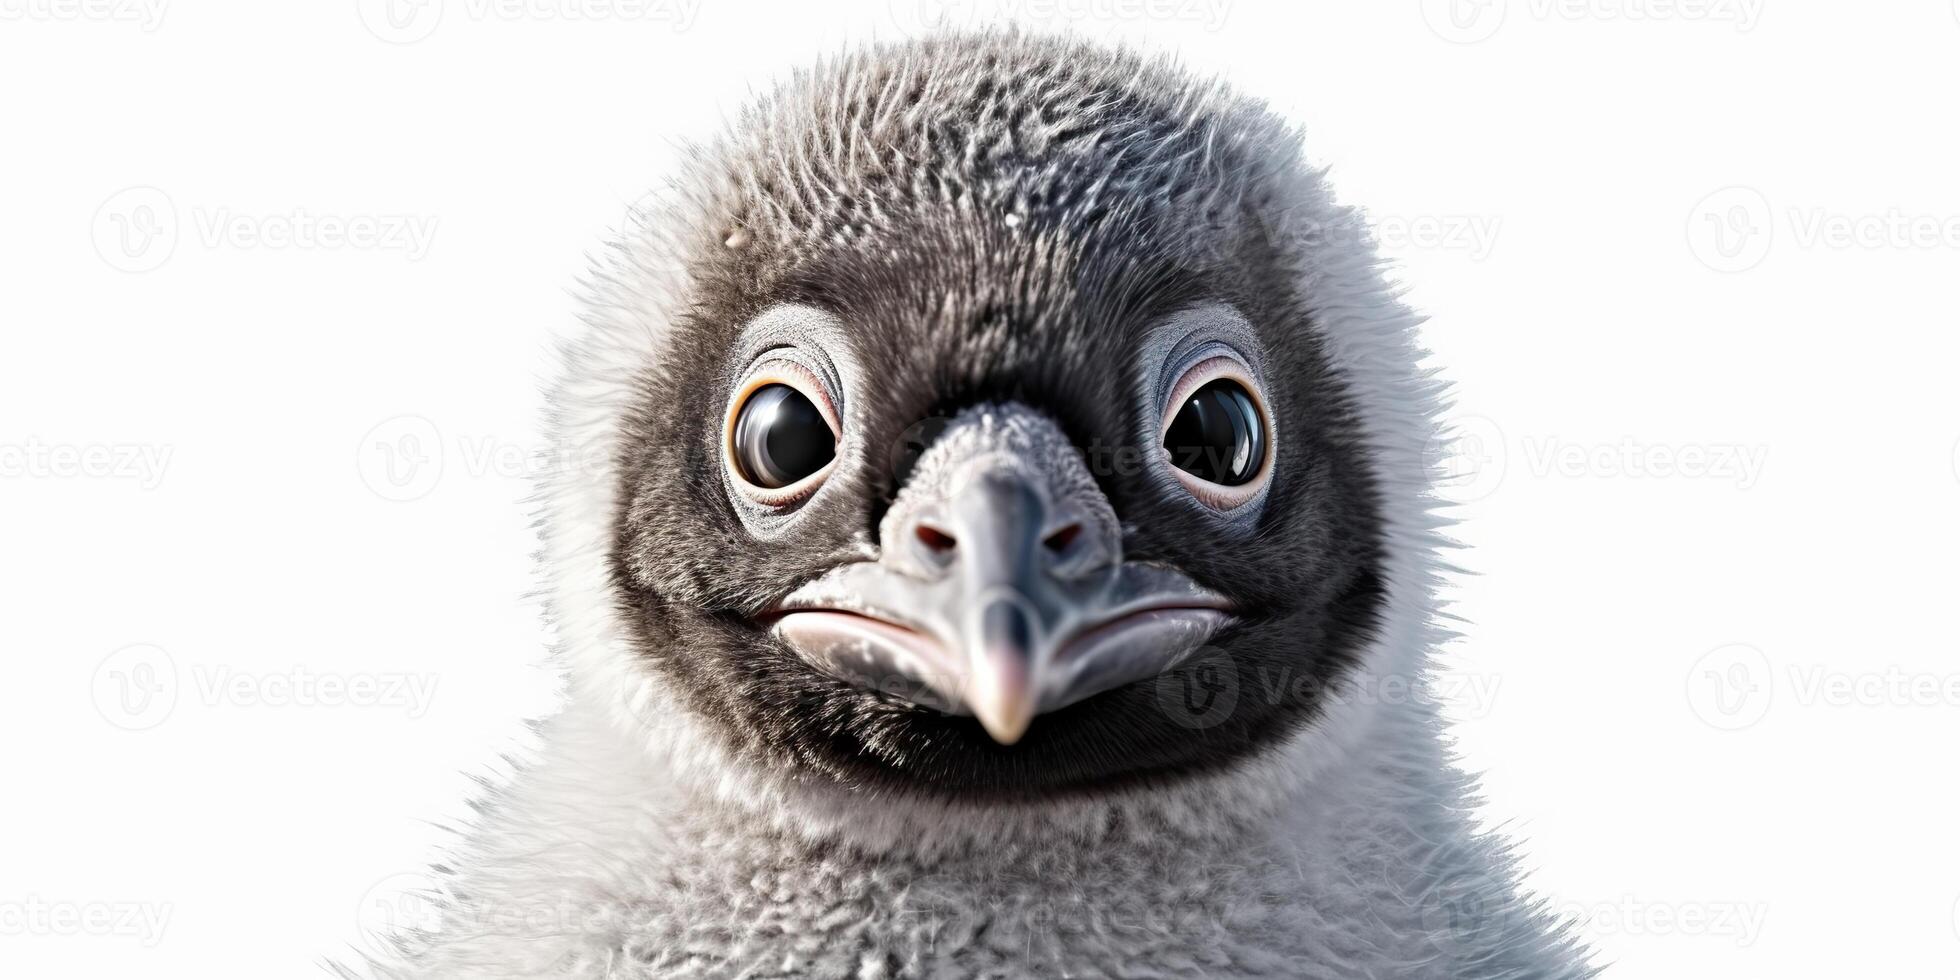 . . Photo illustration of little baby penguin cute funny face. Graphic Art